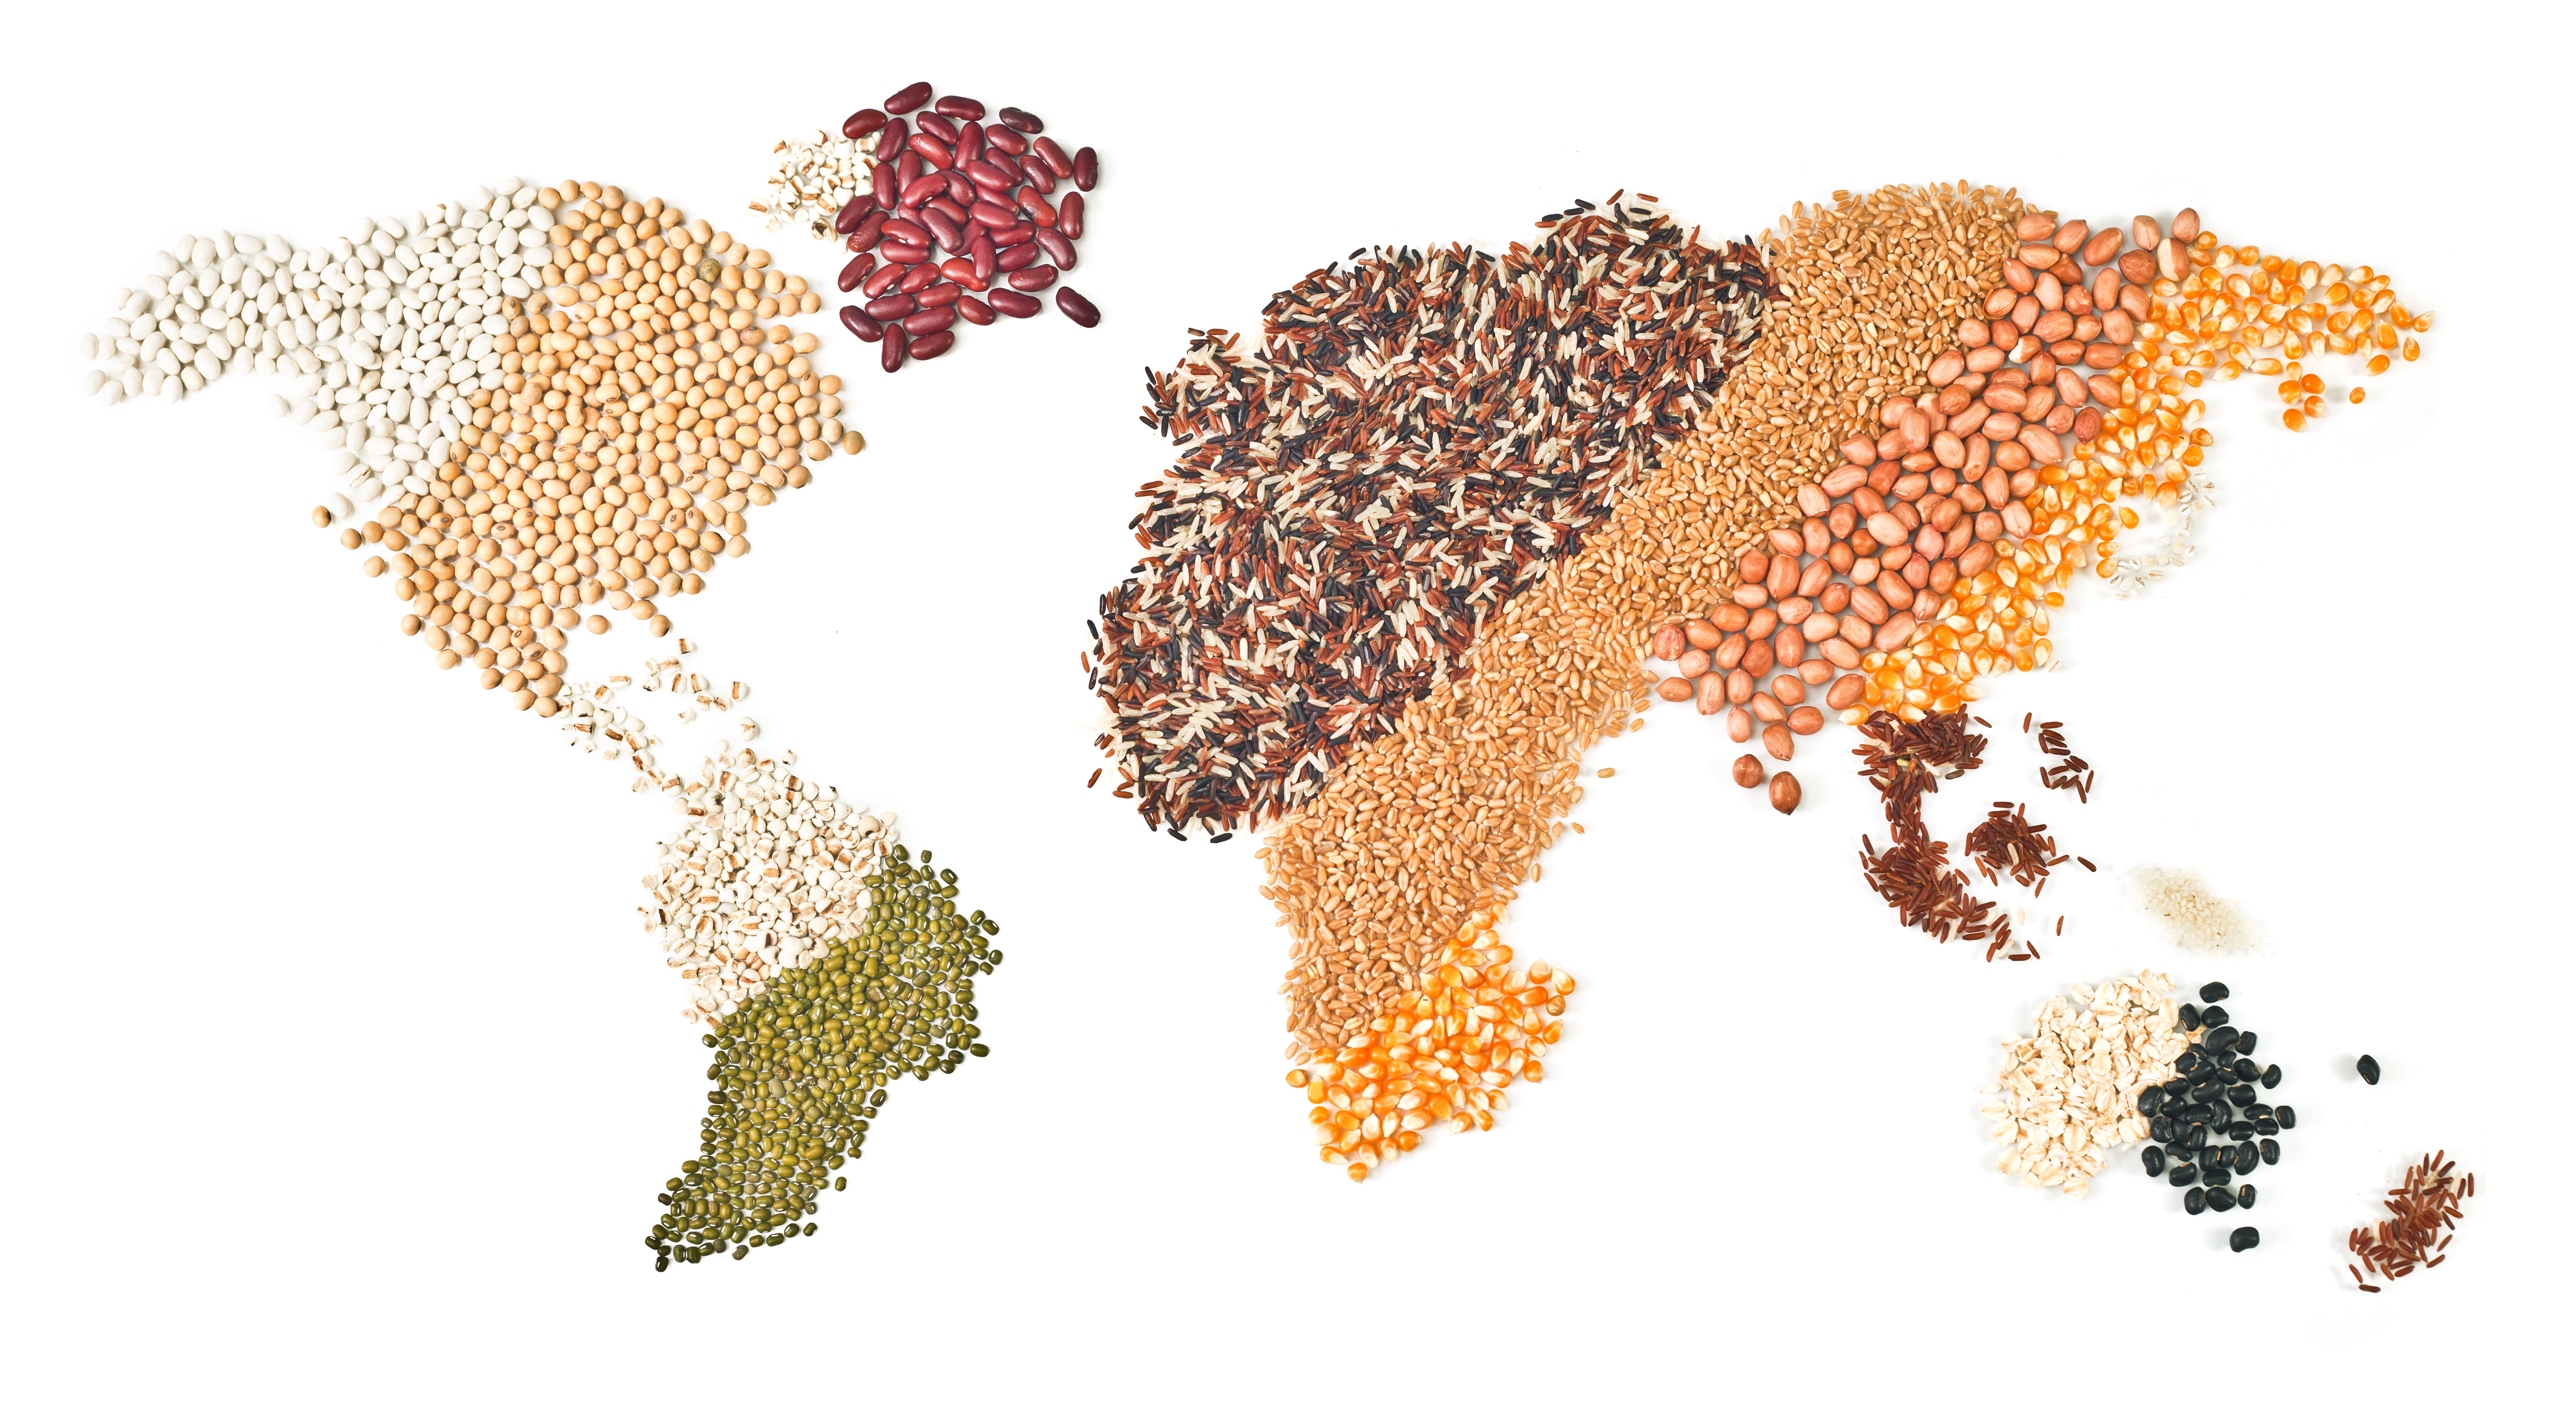 International Grains Council, grains, rice and oilseed on international map